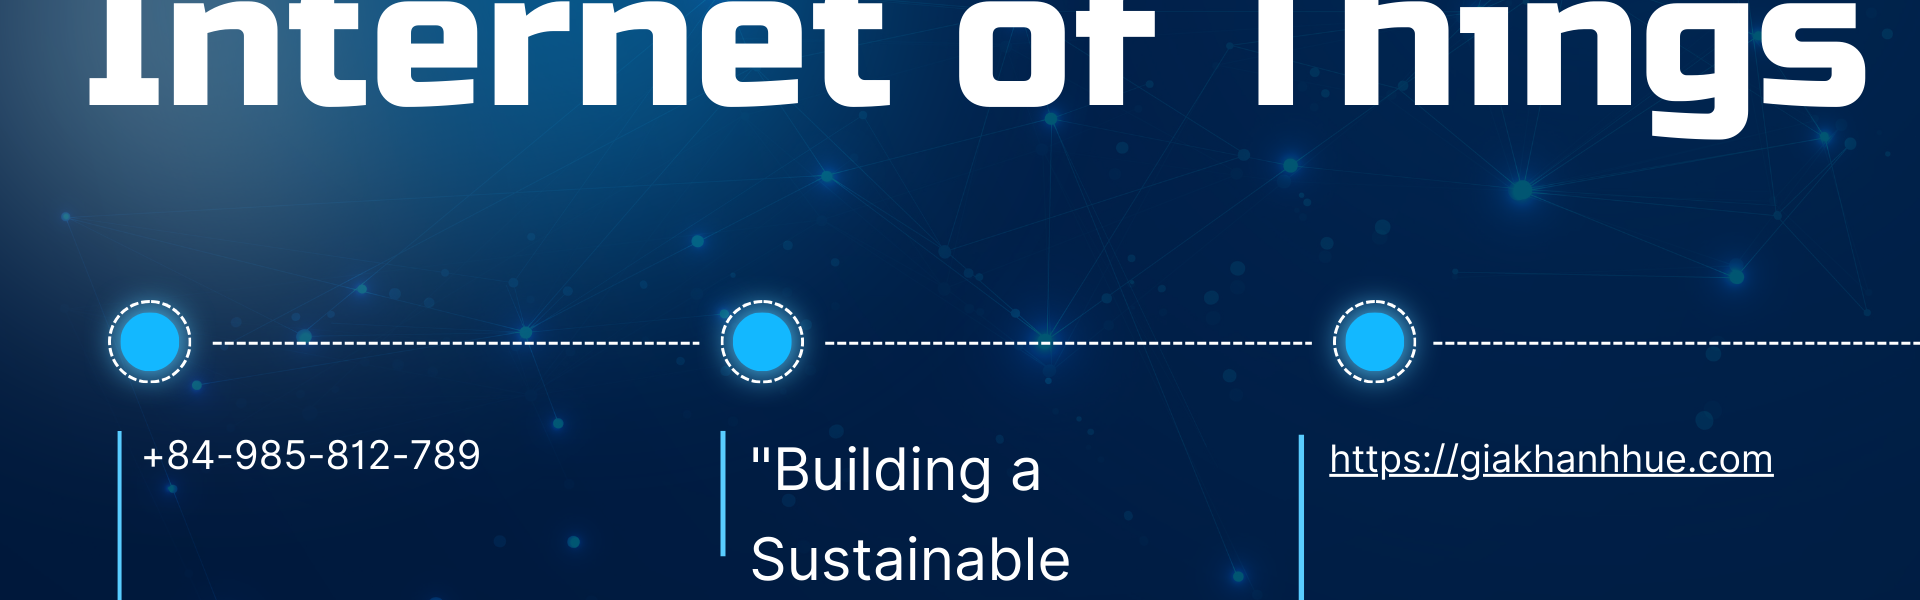 As we stand at the crossroads of technological innovation and environmental responsibility, the Internet of Things (IoT) presents itself as a beacon of hope. "Building a Sustainable Future with IoT" is not just a concept; it's a necessary strategy for integrating technology with environmental stewardship. This article delves into how IoT is instrumental in creating sustainable solutions that address our most pressing ecological challenges.